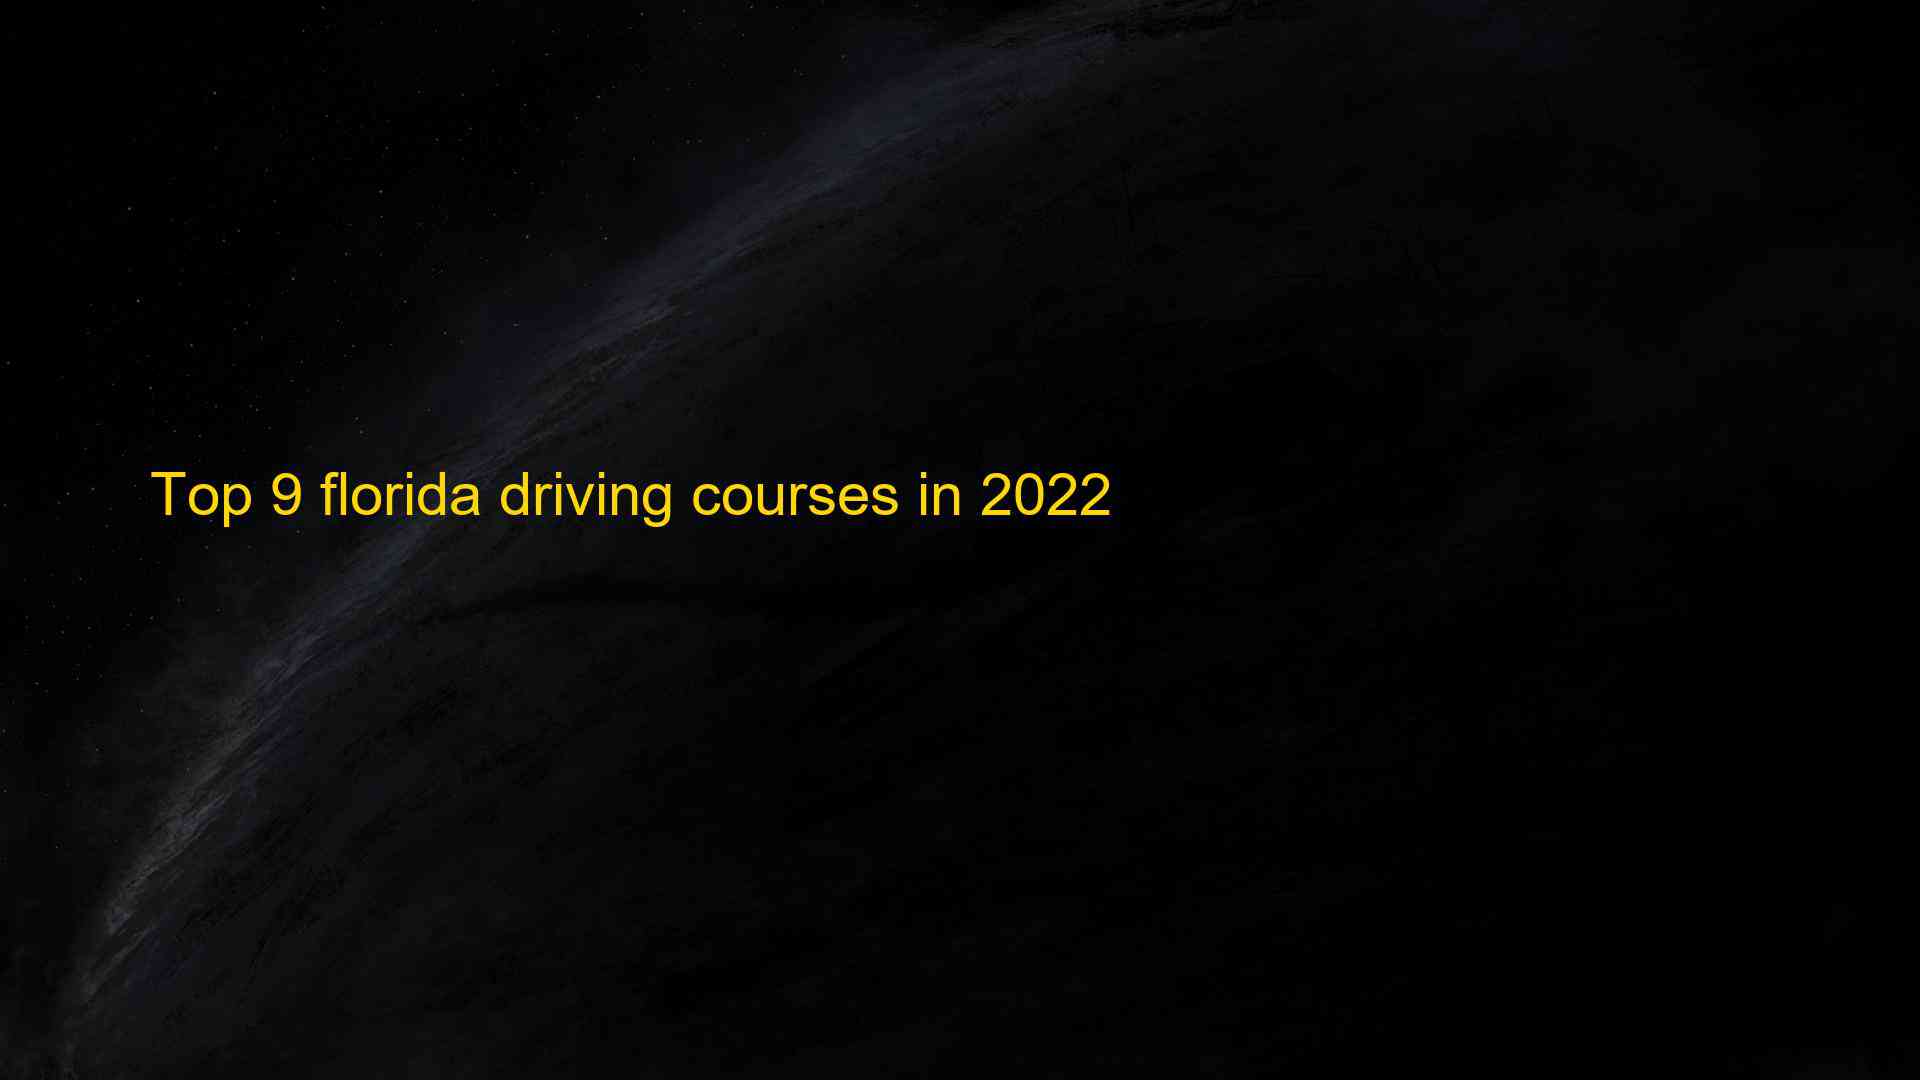 Top 9 florida driving courses in 2022 1661818630